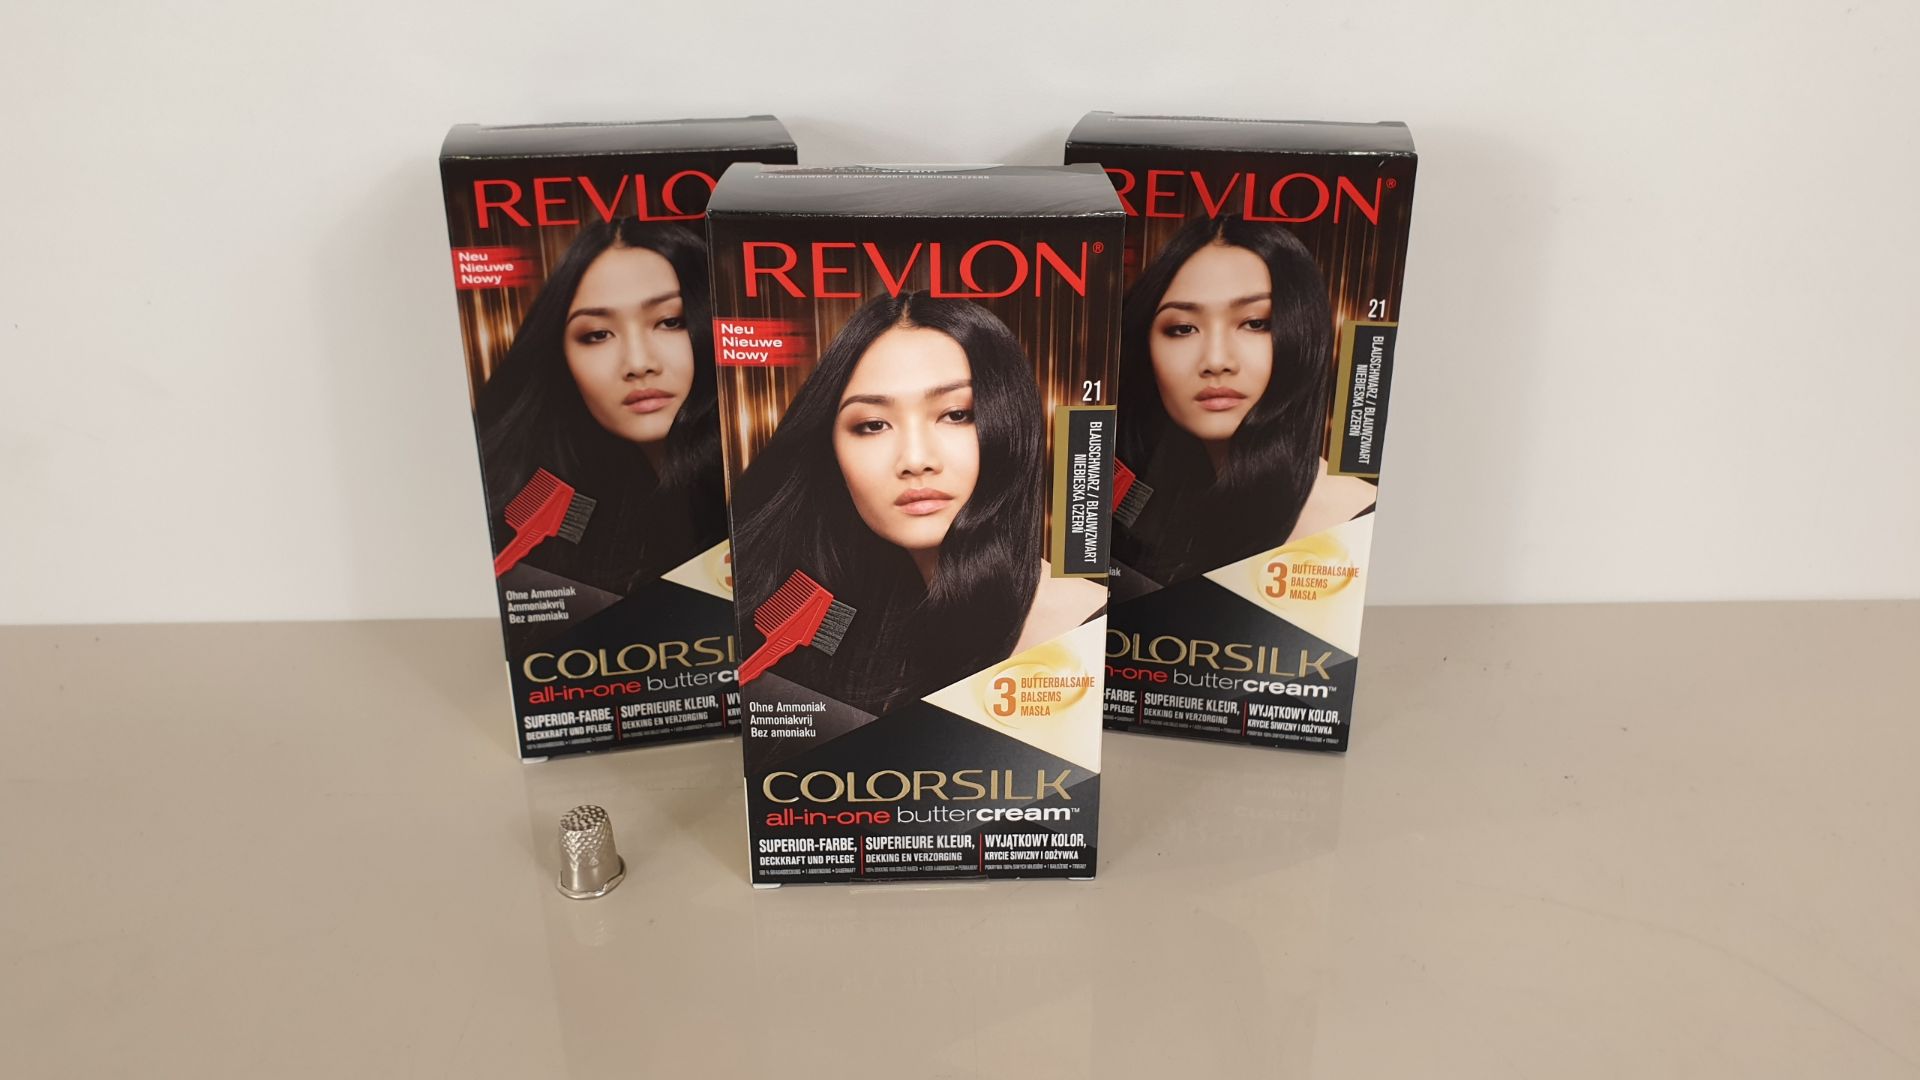 48 X BRAND NEW BOXED REVLON ( COLORSILK ALL IN ONE) BLUE BLACK BUTTERCREAM - IN 4 BOXES